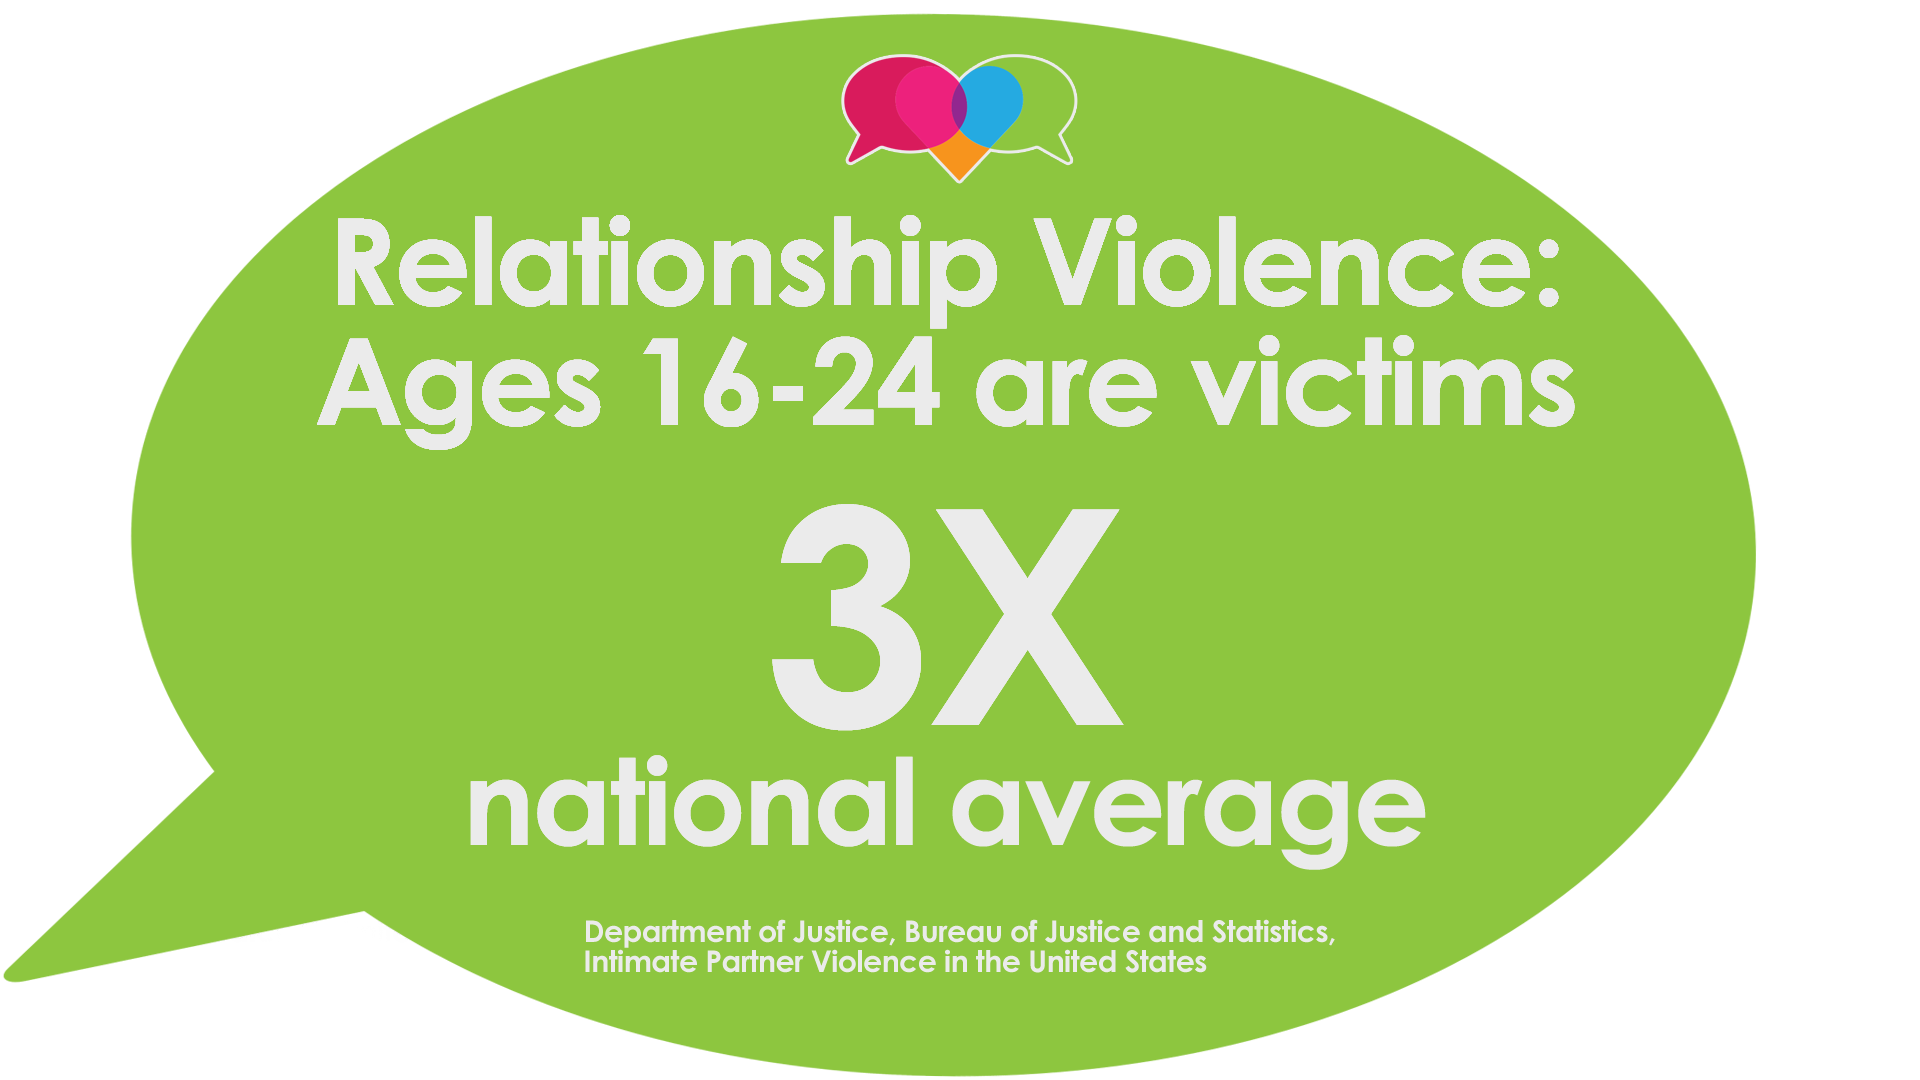 Relationship Violence: Ages 16-24 are victims three times the national average.